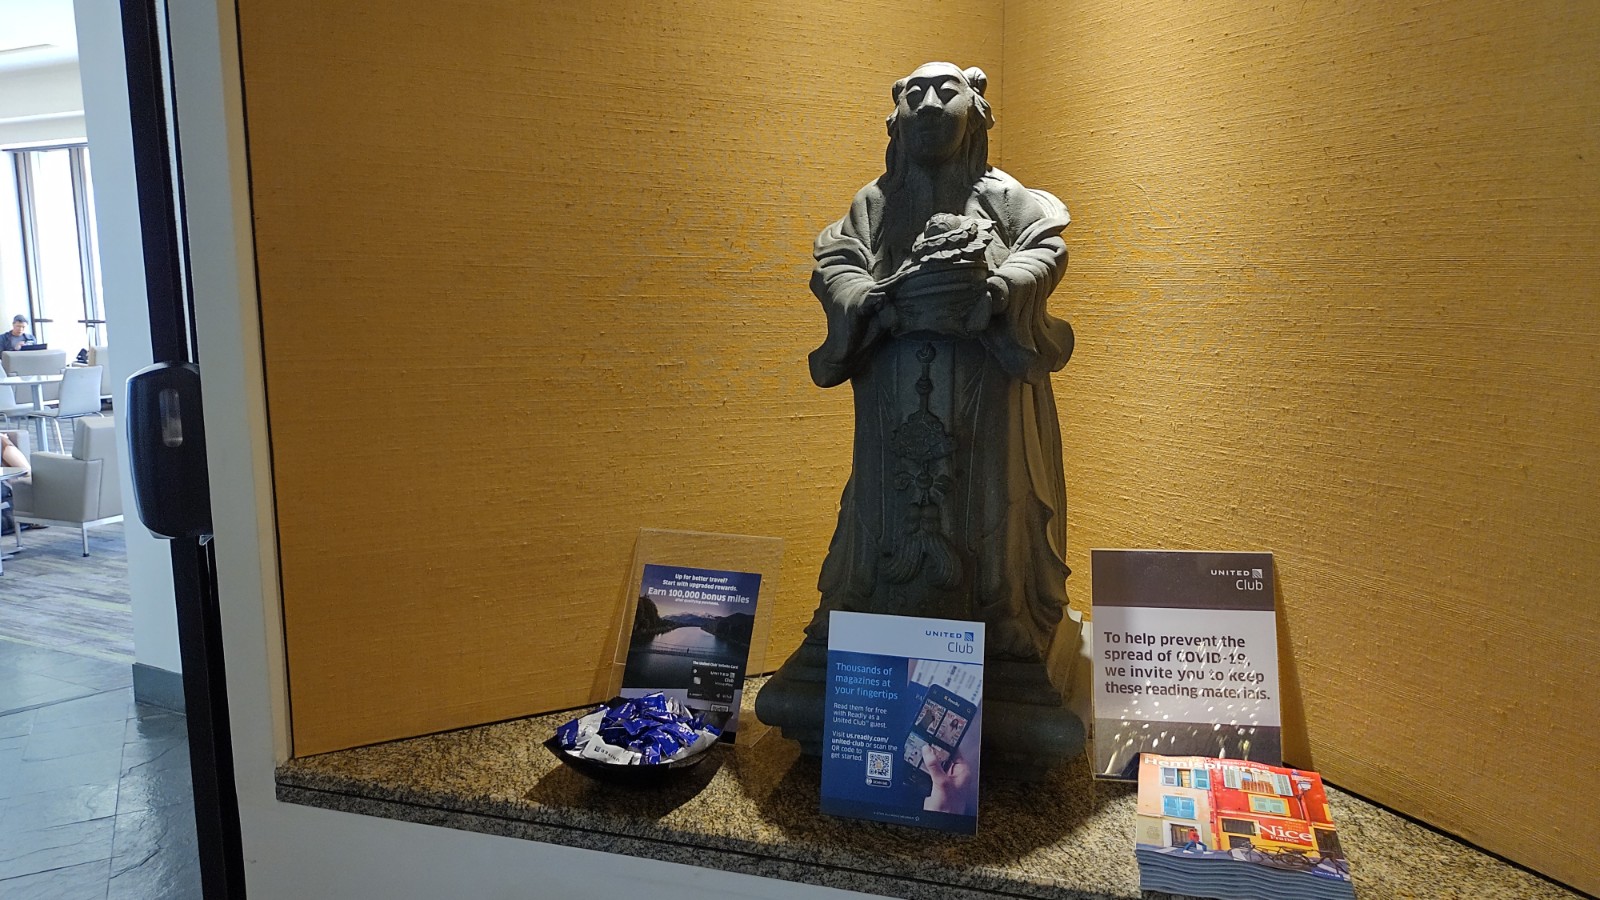 PICTUE OF THE STATUE DISPLAY CASE AT ENTRANCE.